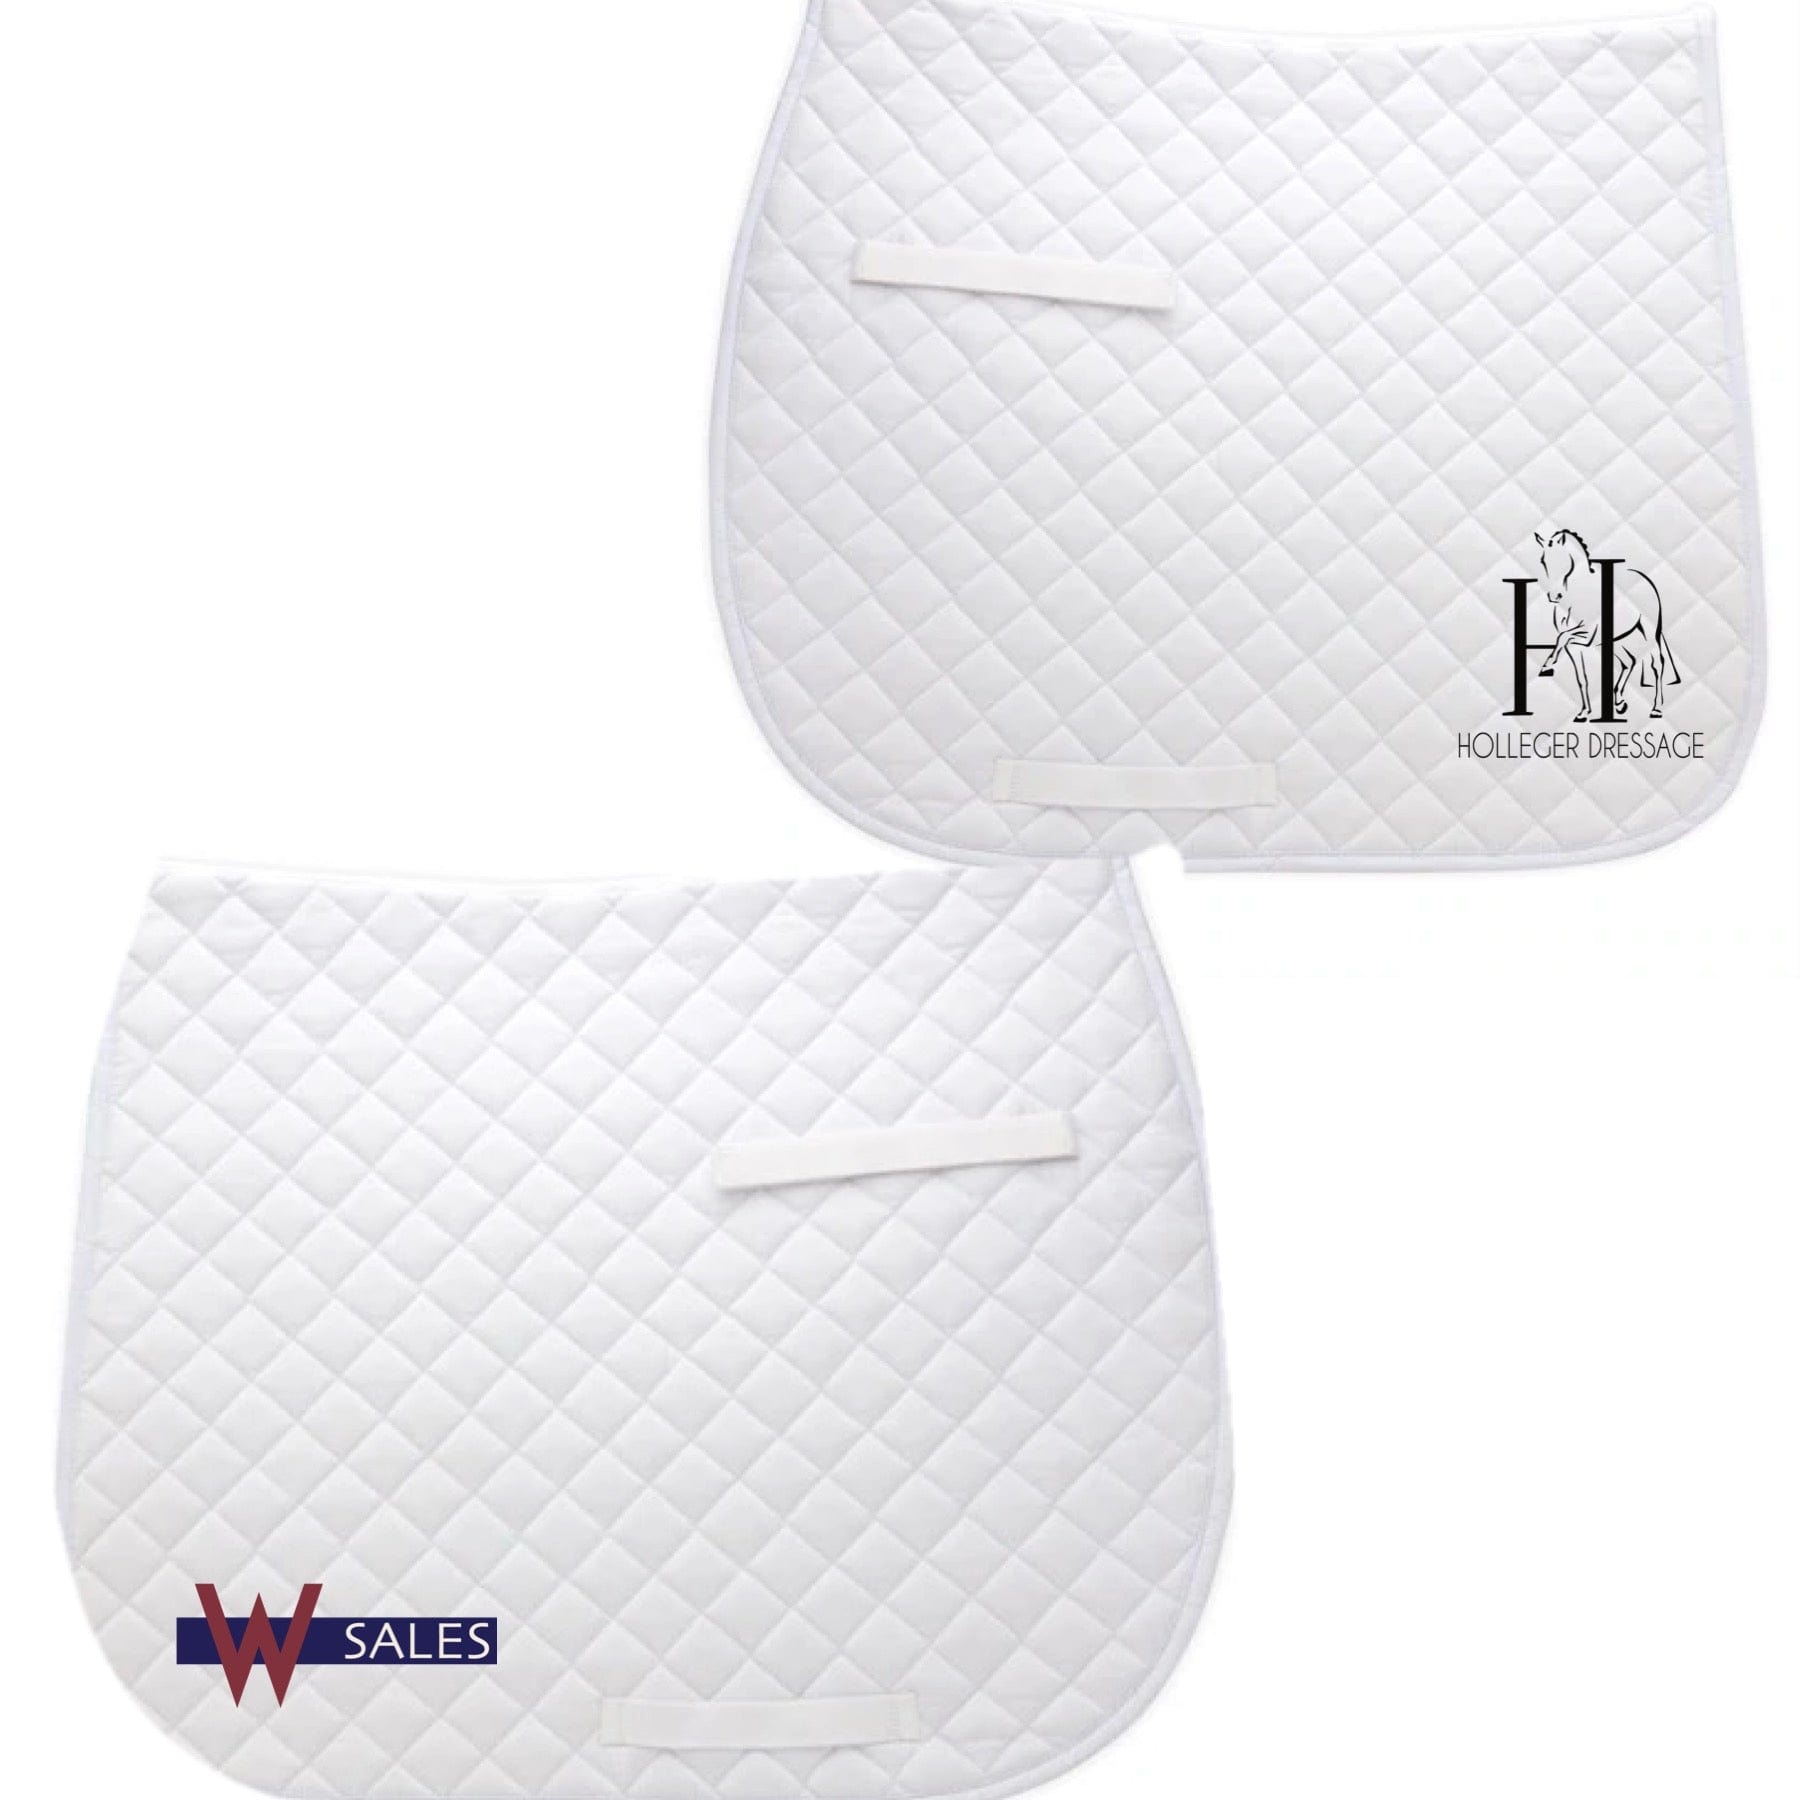 Equestrian Team Apparel Holleger Dressage/WSI - Dressage Saddle Pad equestrian team apparel online tack store mobile tack store custom farm apparel custom show stable clothing equestrian lifestyle horse show clothing riding clothes horses equestrian tack store